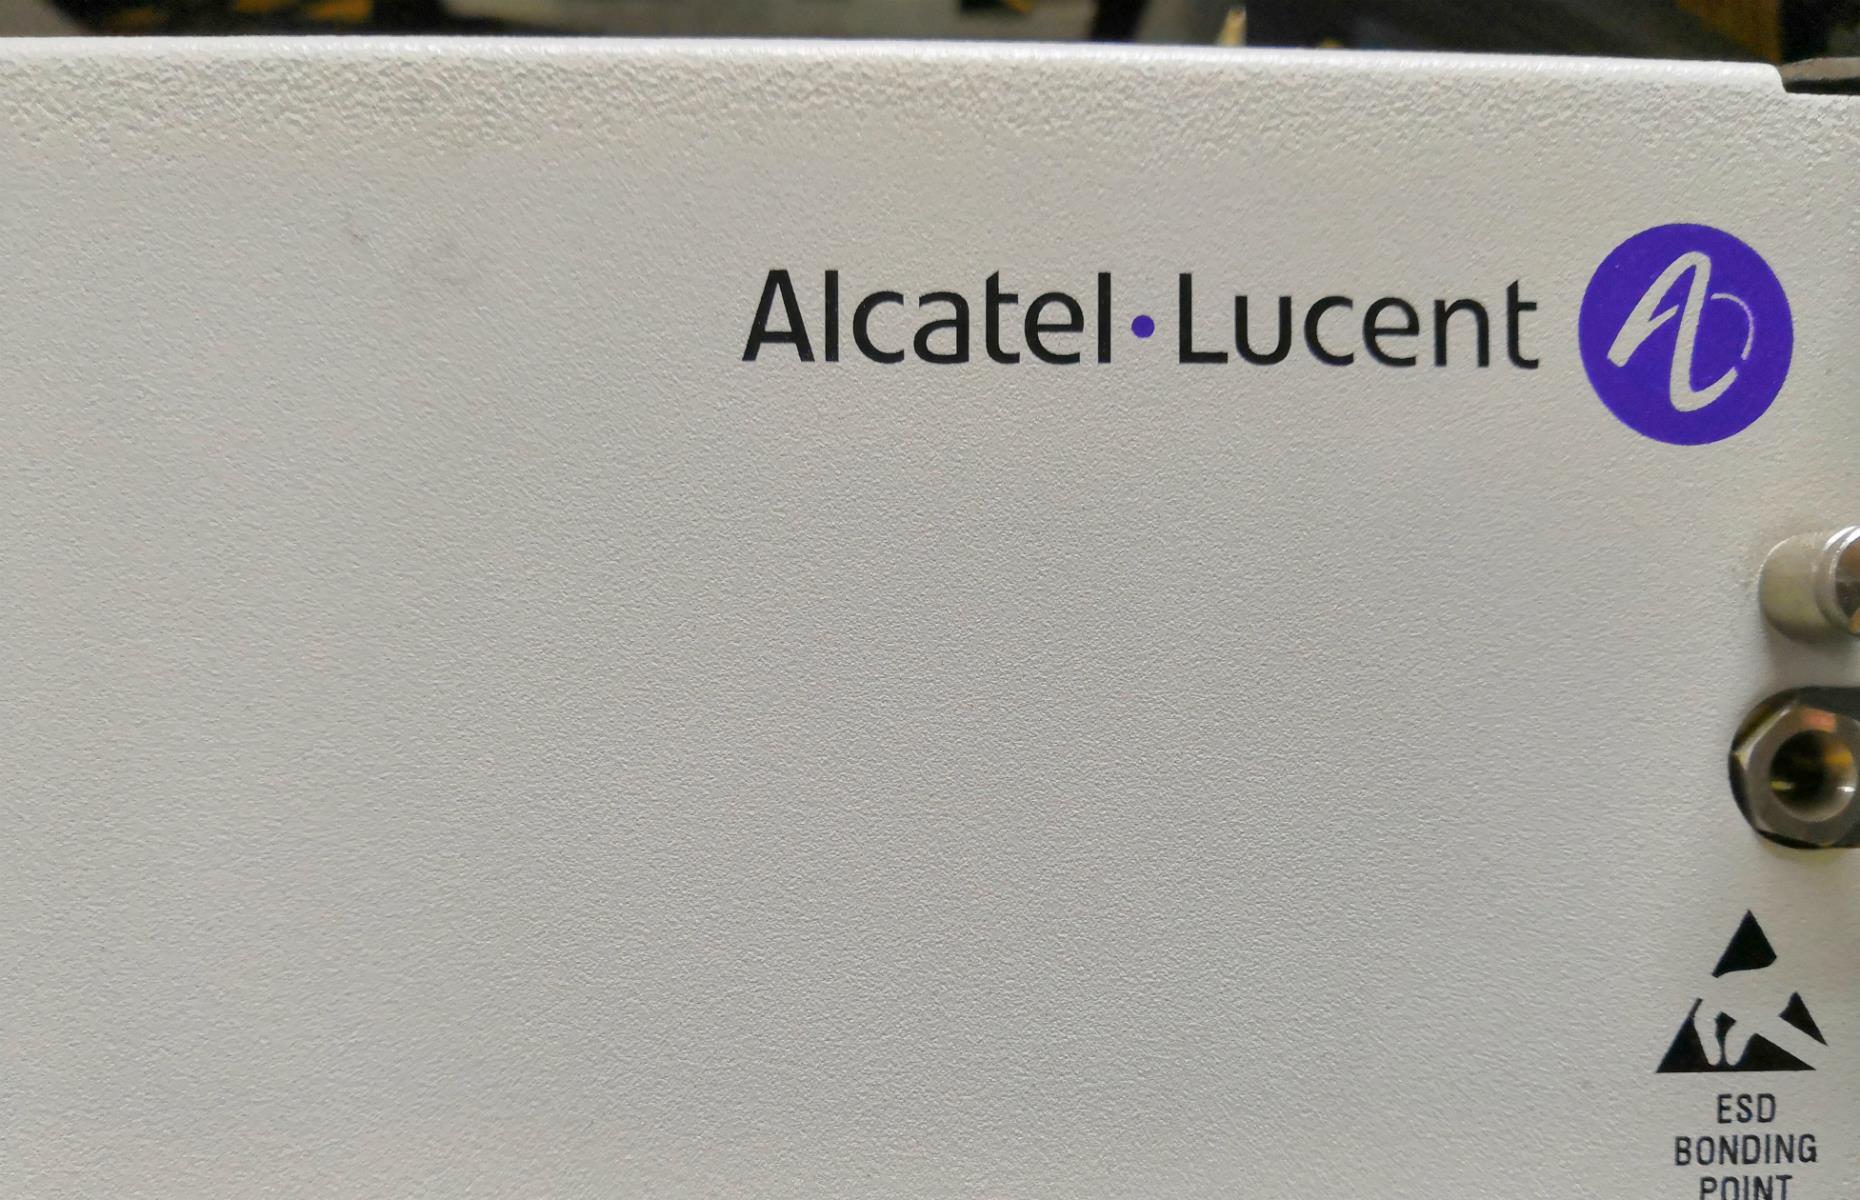 Alcatel and Lucent: 2006